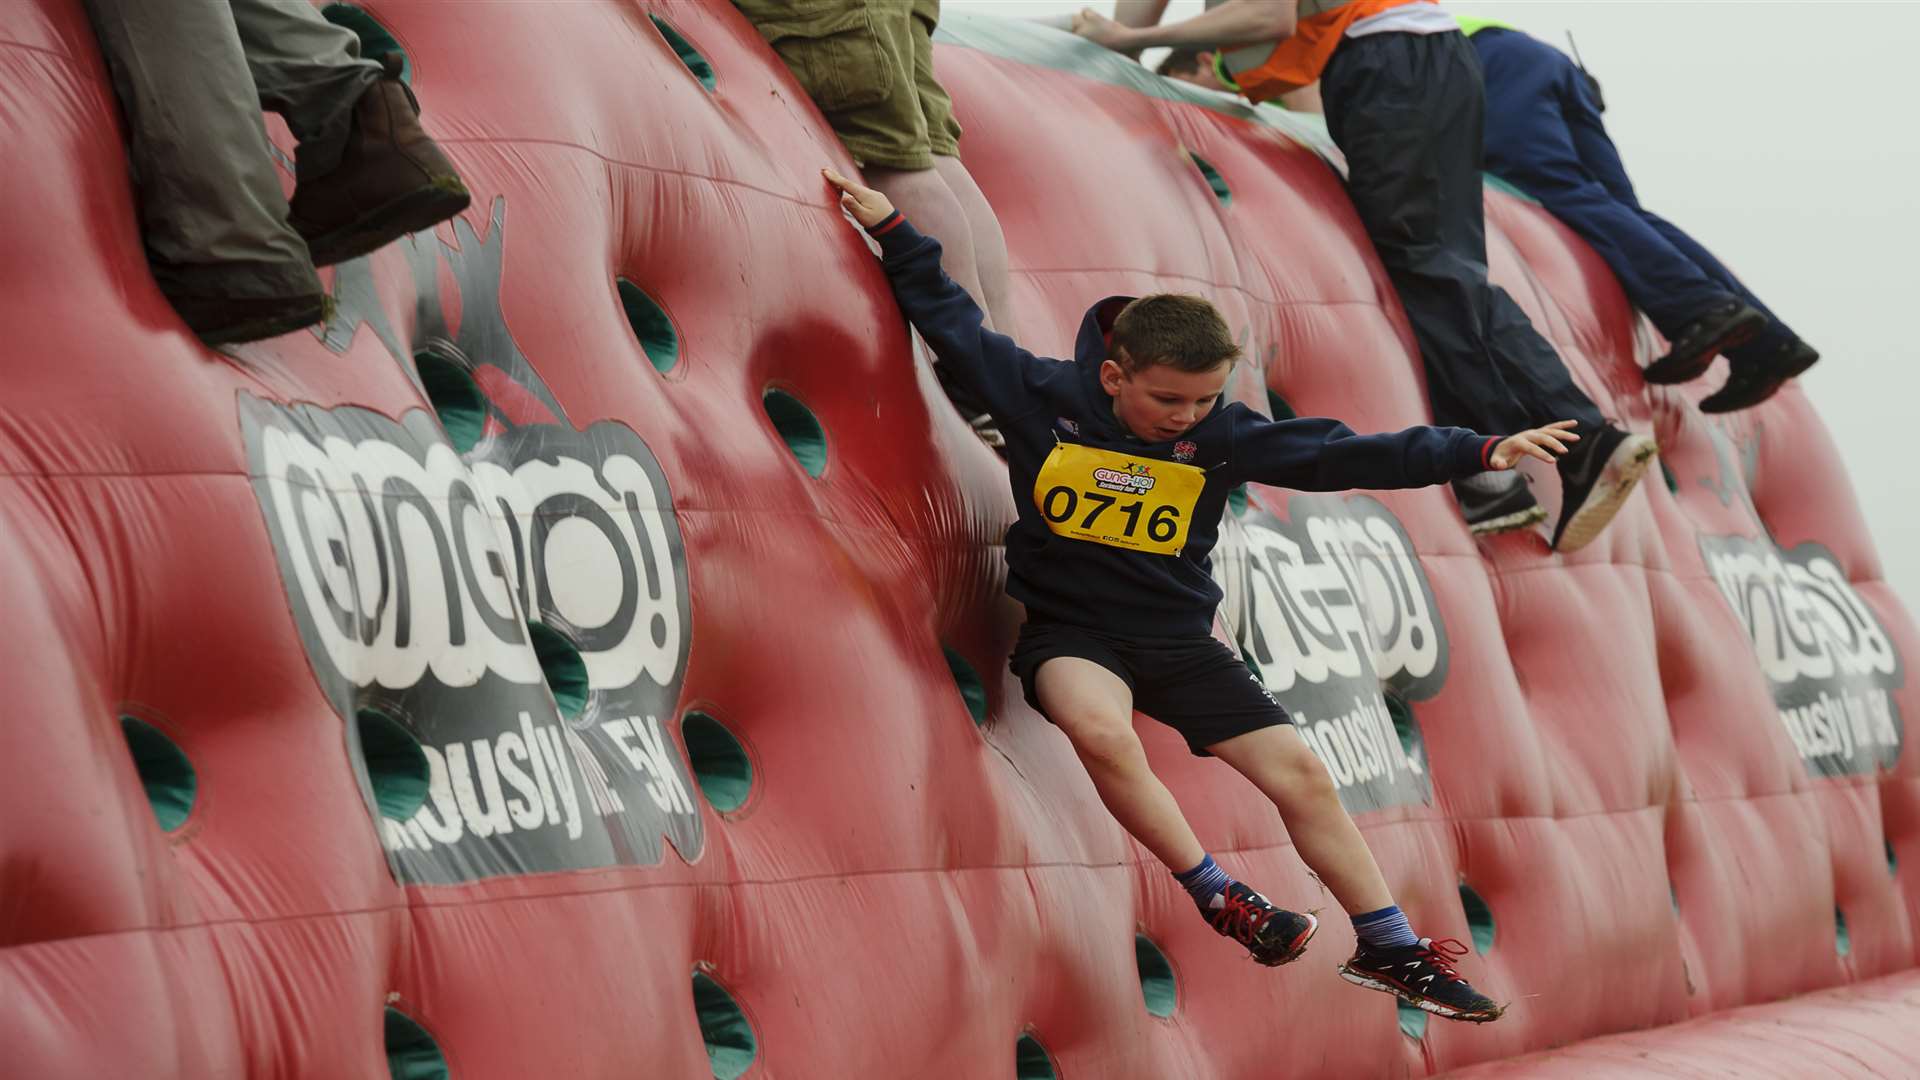 Climbing the melon wall obstacle